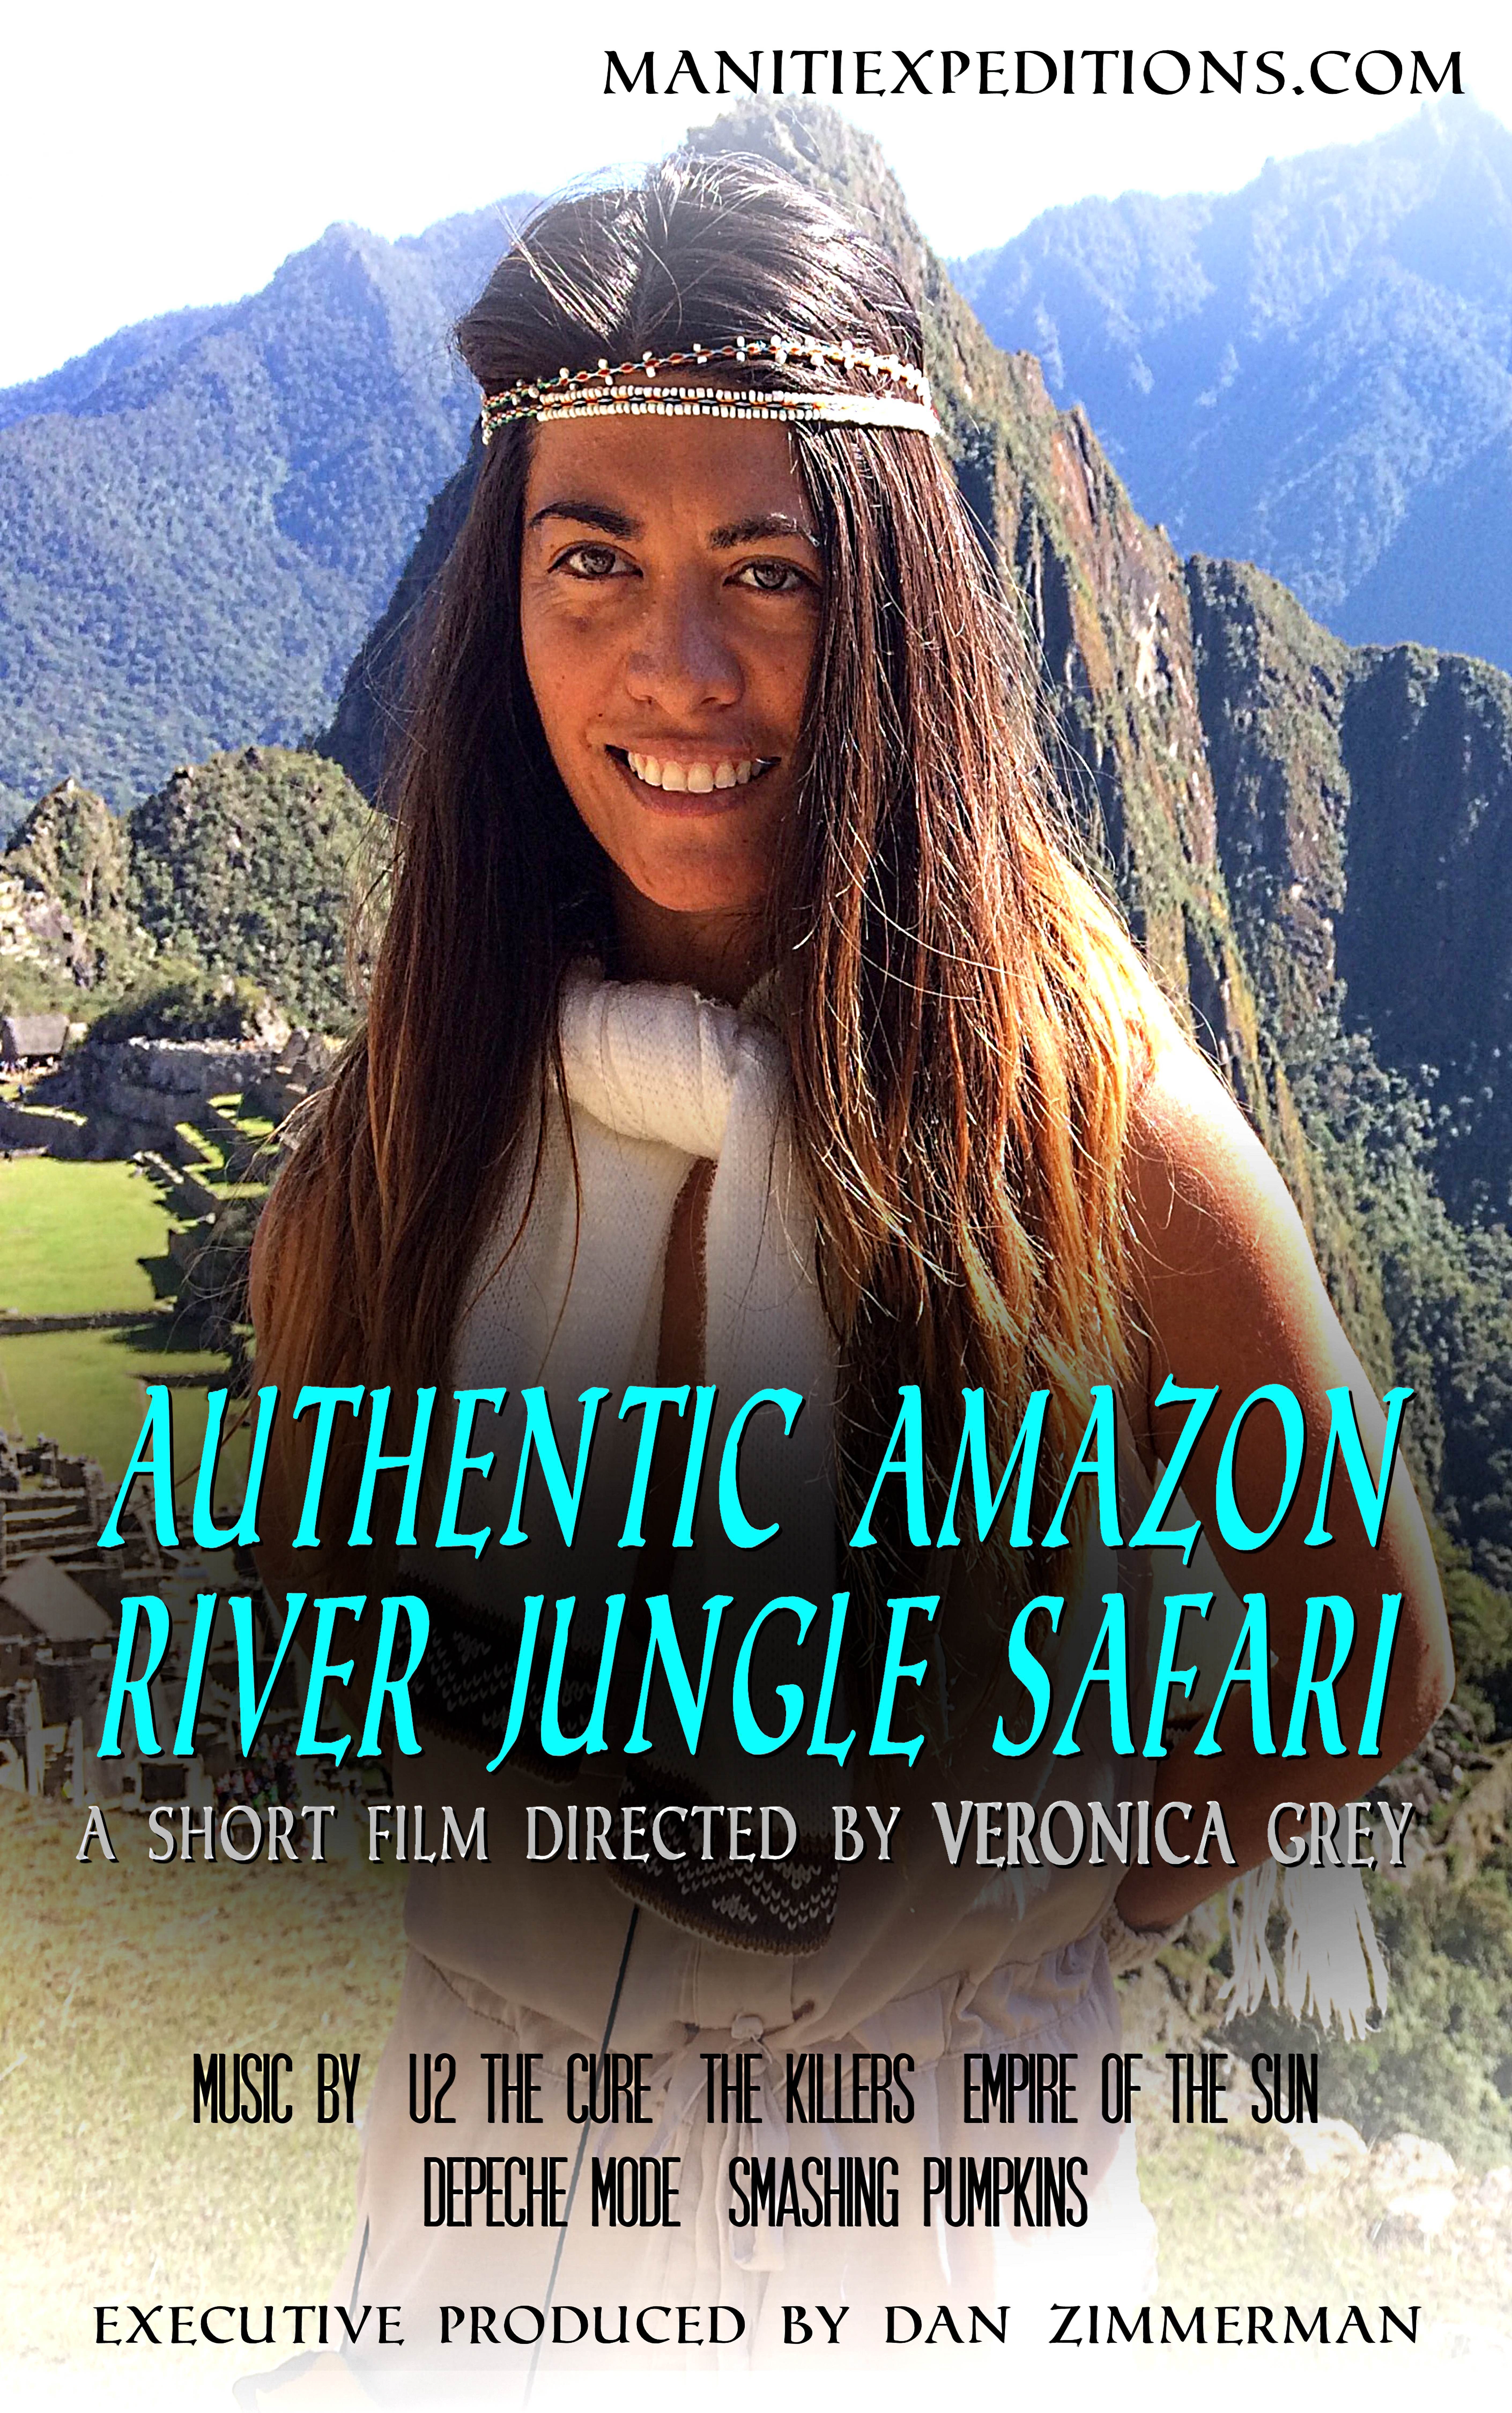 Short film about the Amazon by A list talent Veronica Grey https://vimeo.com/137538128 features music by U2, The Cure, The Killers, Empire of the Sun, Depeche Mode, and Smashing Pumpkins